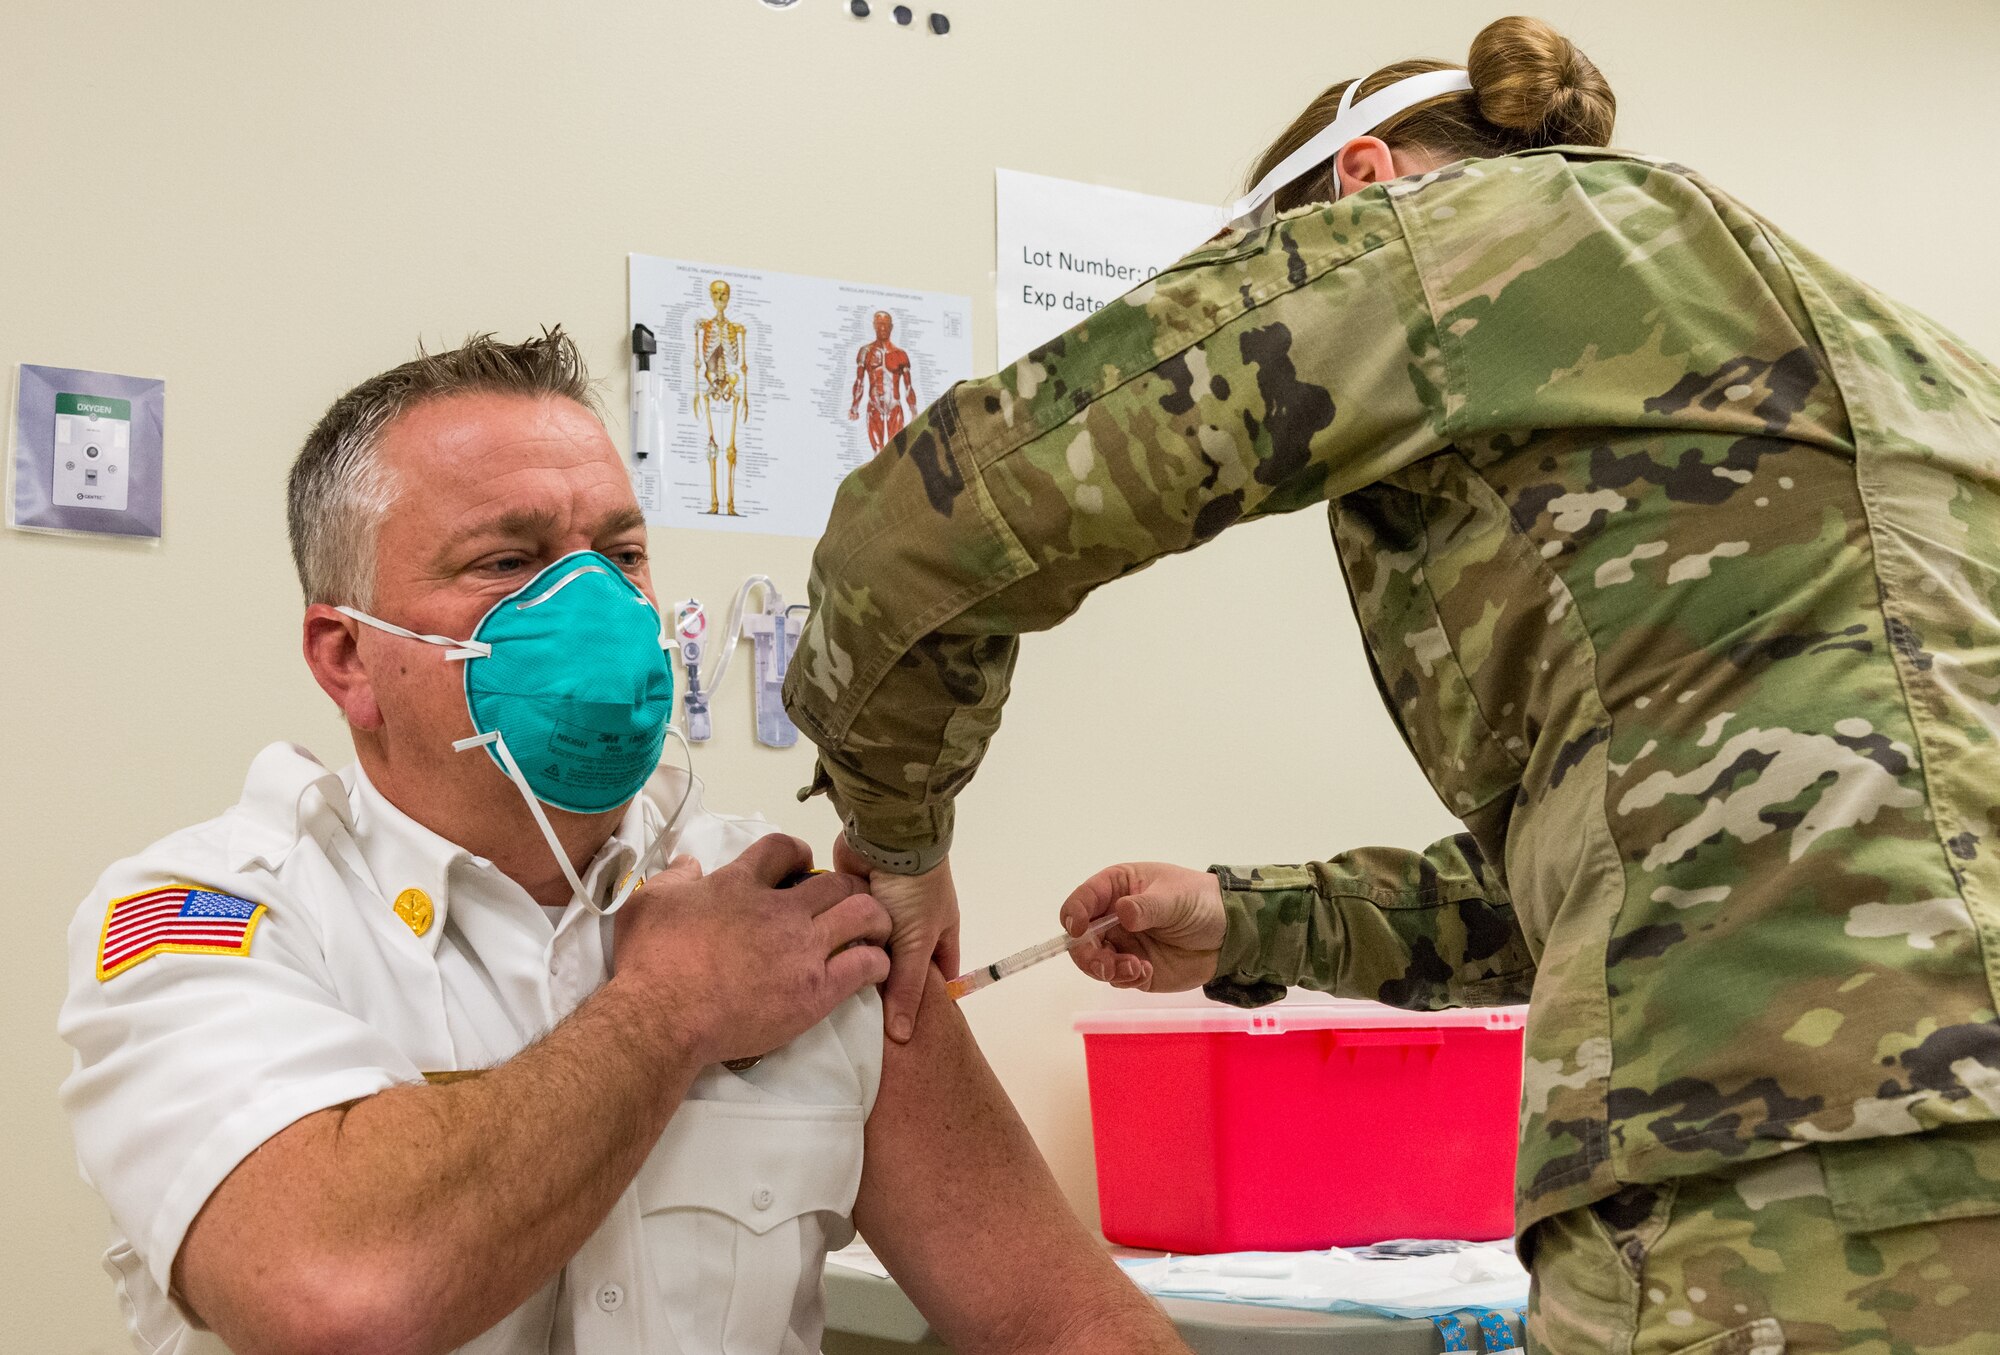 Aaron Weisenberger, 436th Civil Engineer Squadron fire department assistant chief for health and safety, is administered the COVID-19 vaccine by Staff Sgt. Kelsey Loeser, 436th Medical Group unit training manager, Jan. 15, 2021, at Dover Air Force Base, Delaware. Weisenberger was among the first Team Dover frontline workers who voluntarily received the vaccine in concurrence with Department of Defense guidance. The vaccine was granted emergency use authorization by the U.S. Food and Drug Administration for use in prevention of COVID-19. (U.S. Air Force photo by Roland Balik)